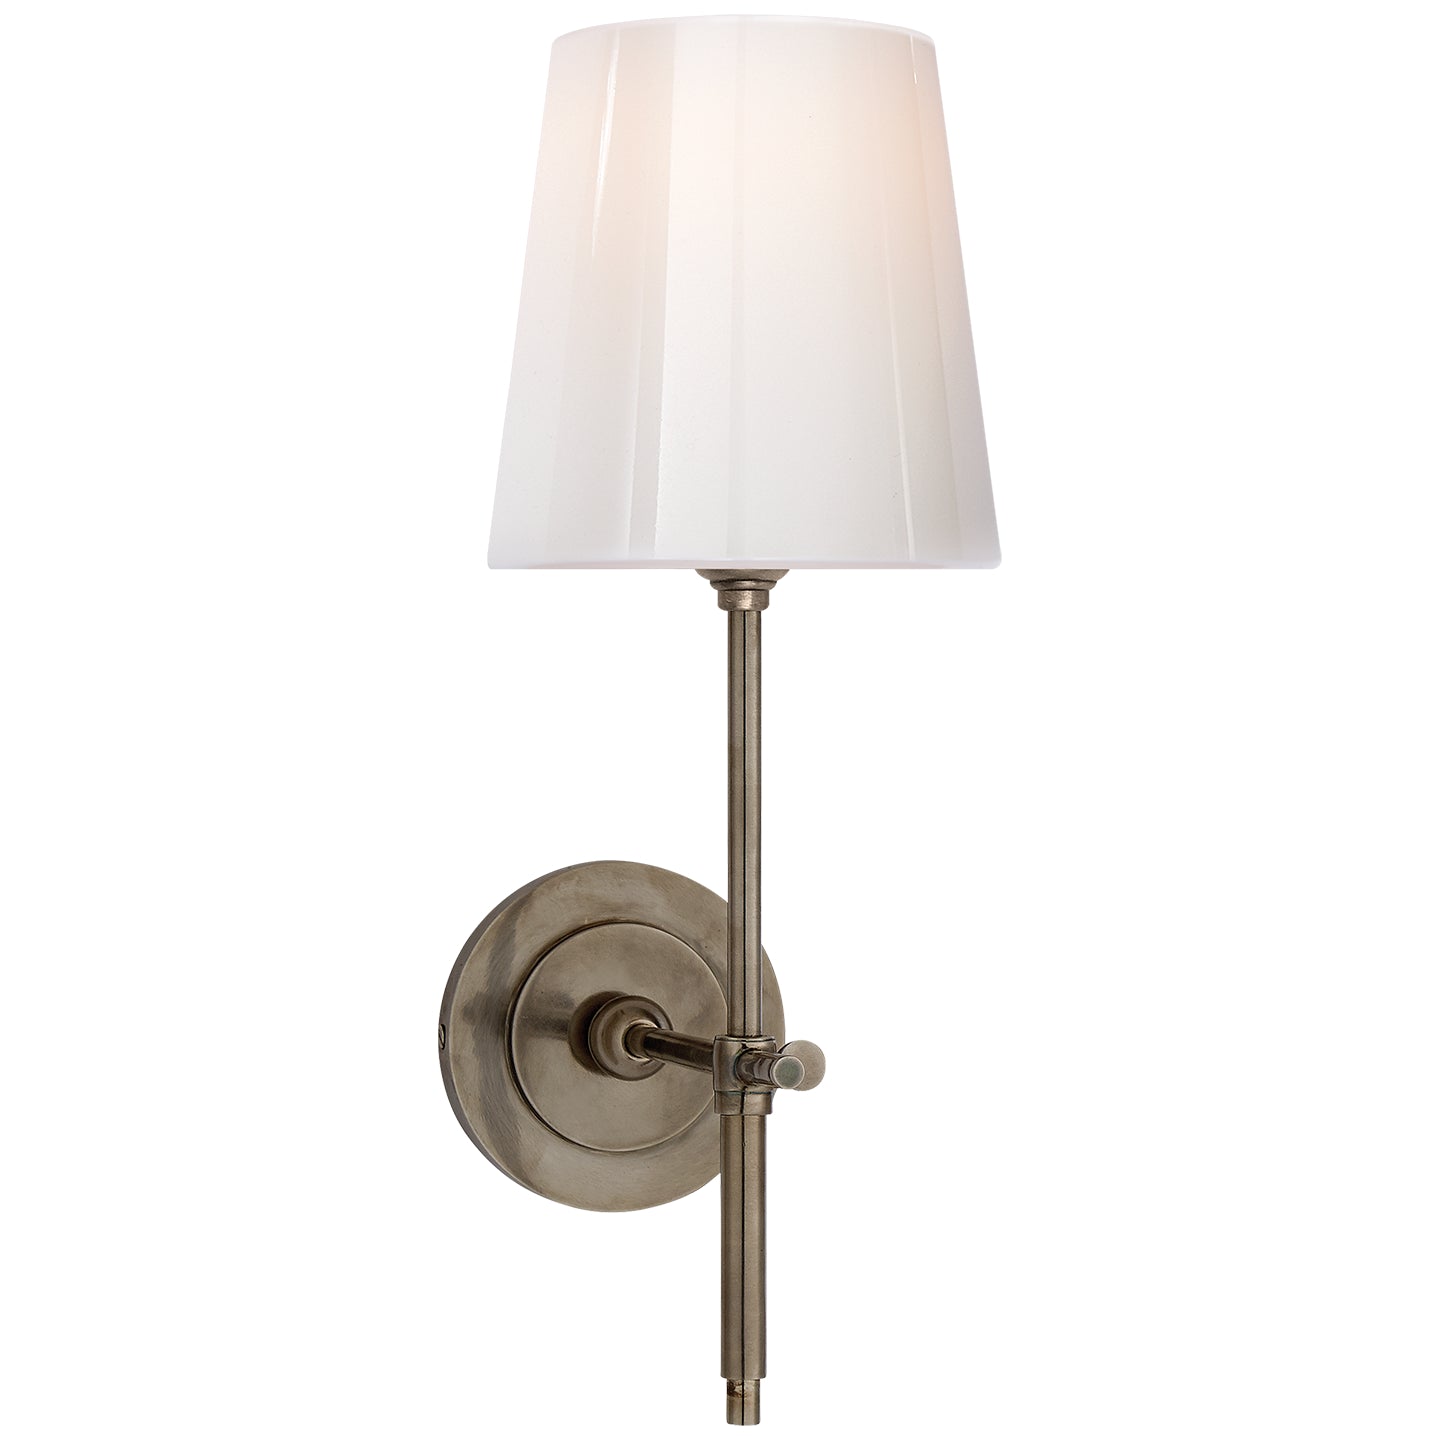 Load image into Gallery viewer, Visual Comfort Signature - TOB 2022AN-WG - One Light Wall Sconce - Bryant - Antique Nickel
